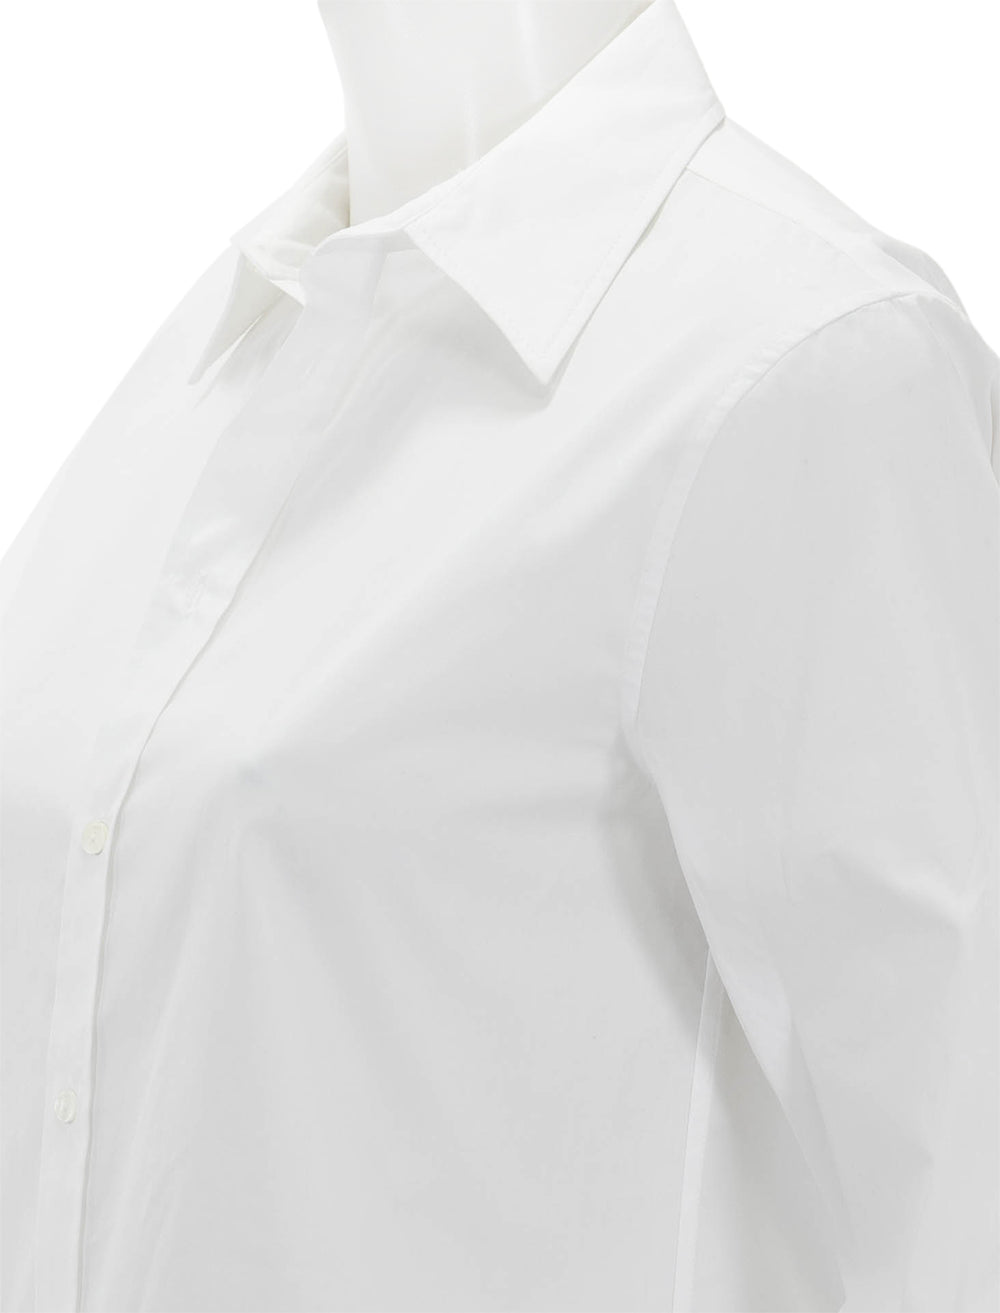 Close-up view of Nili Lotan's raphael classic shirt in white.